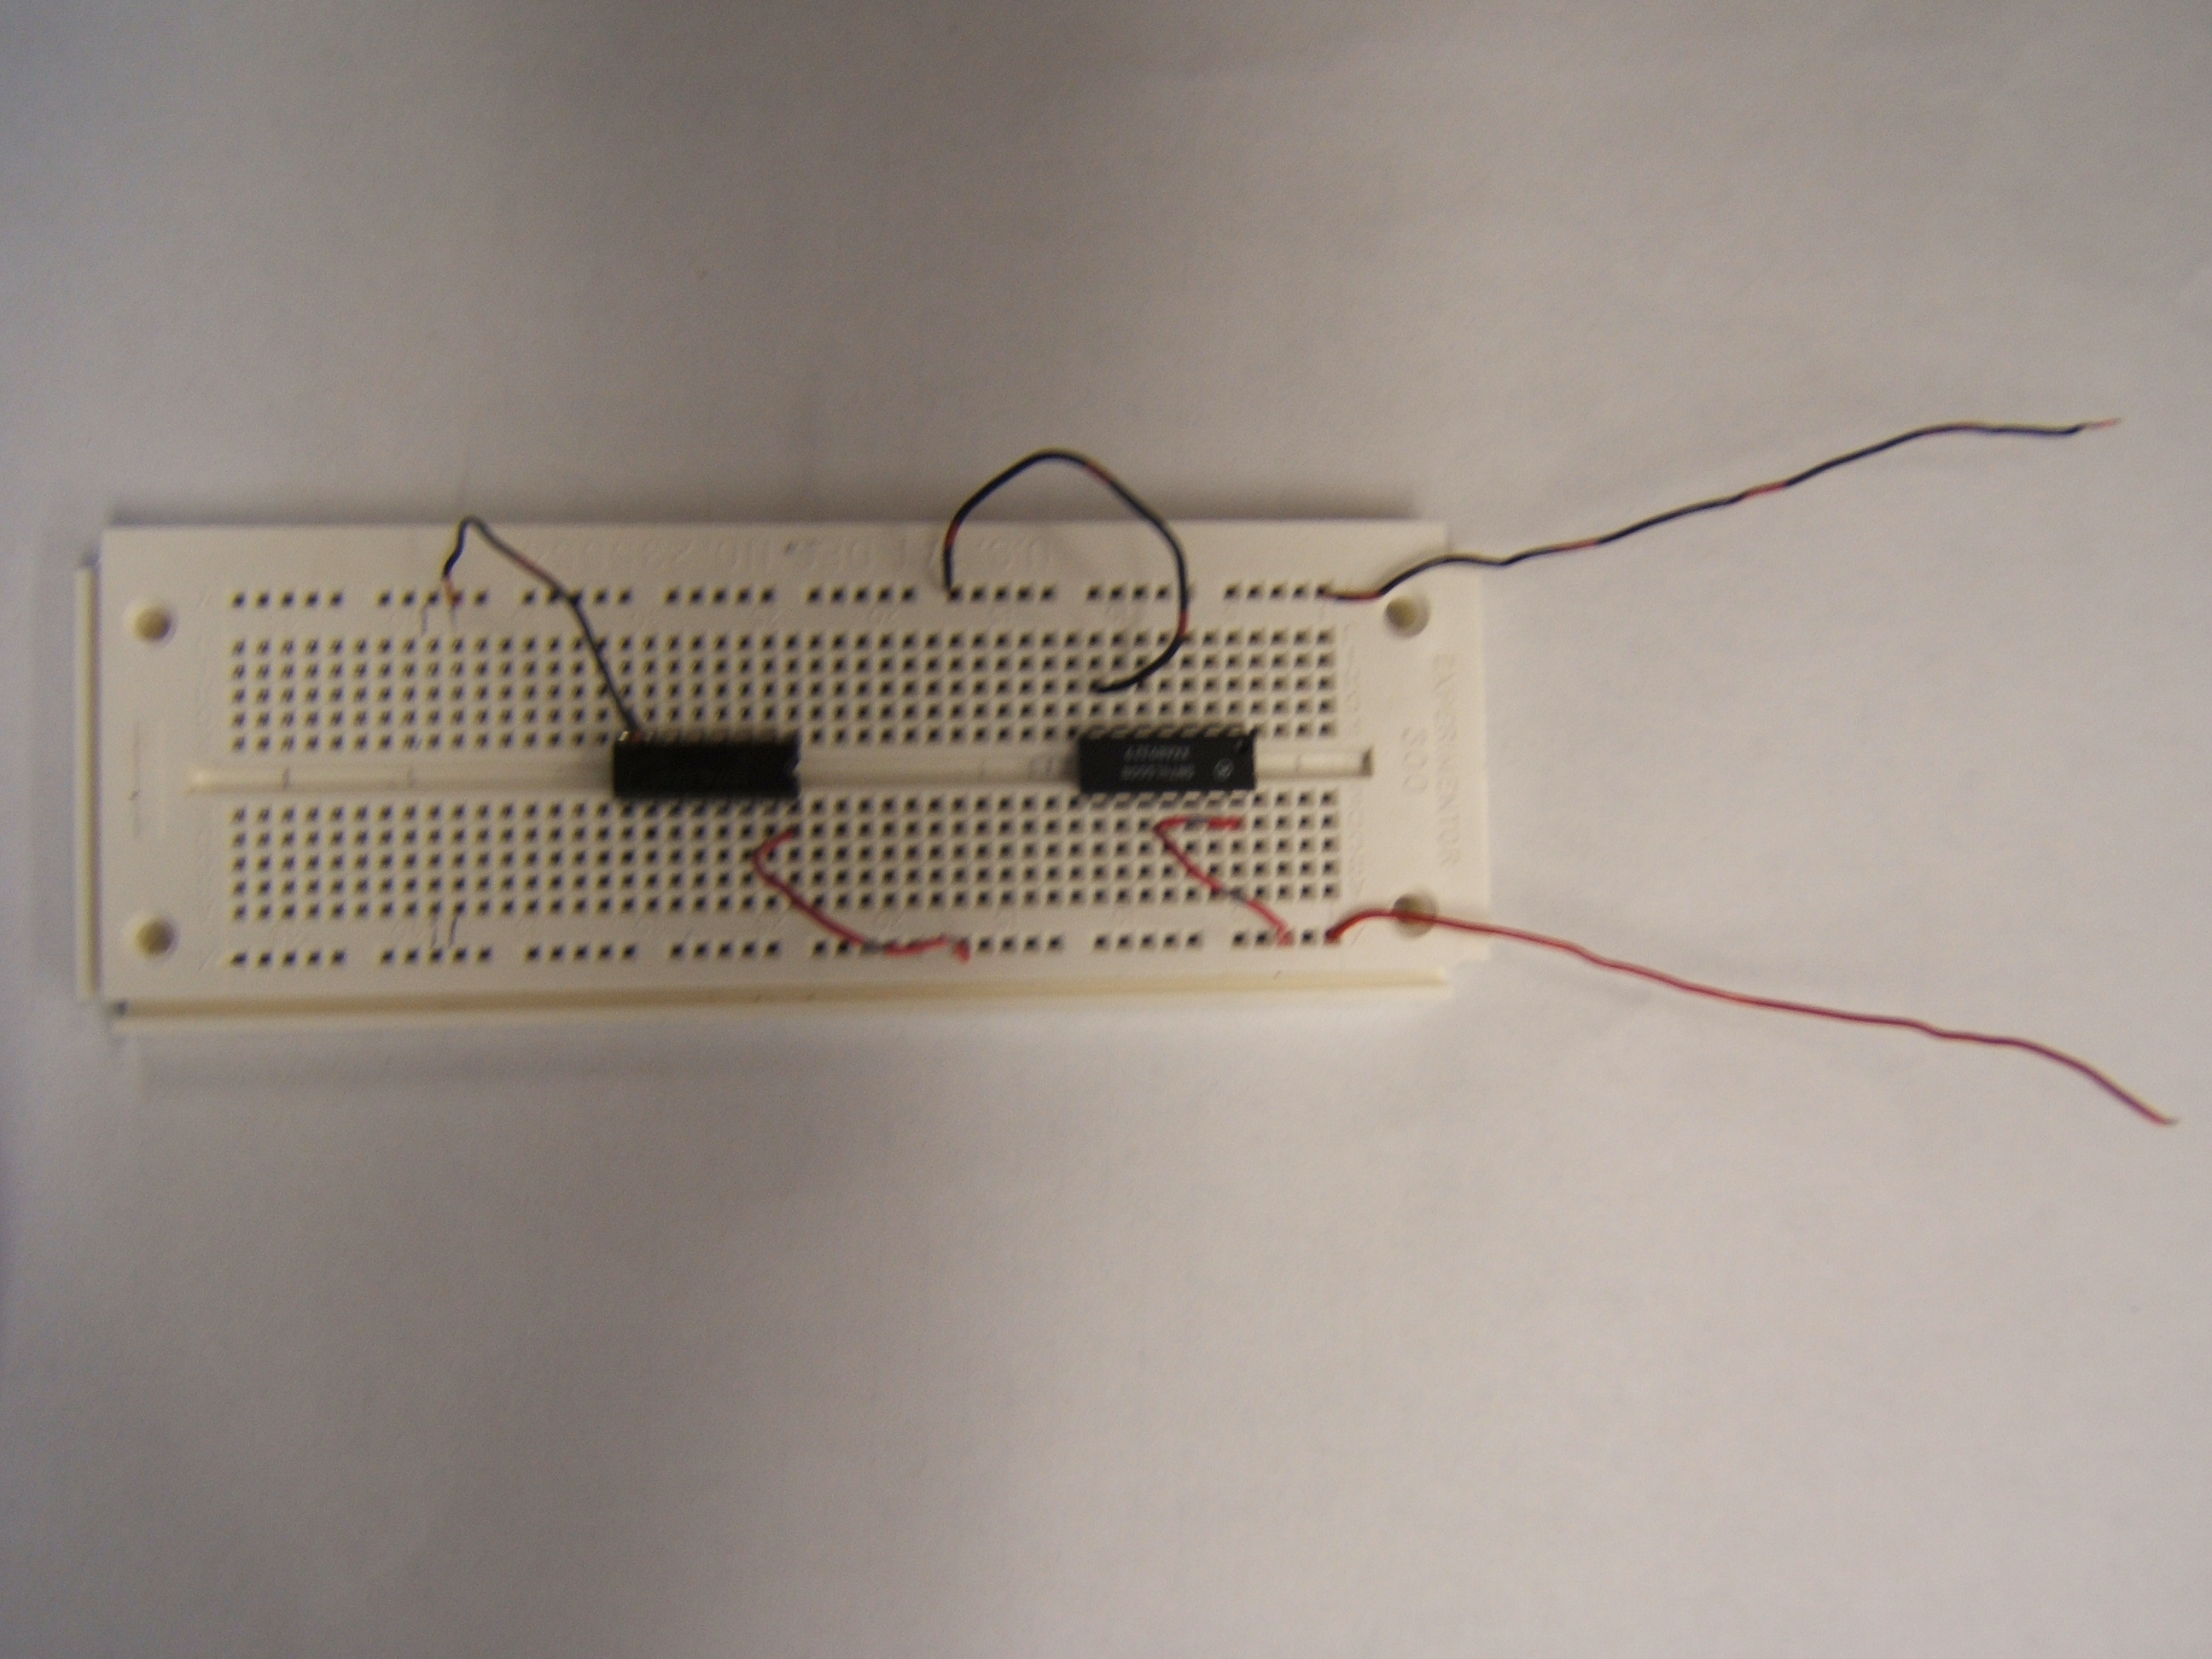 two chips on a breadboard